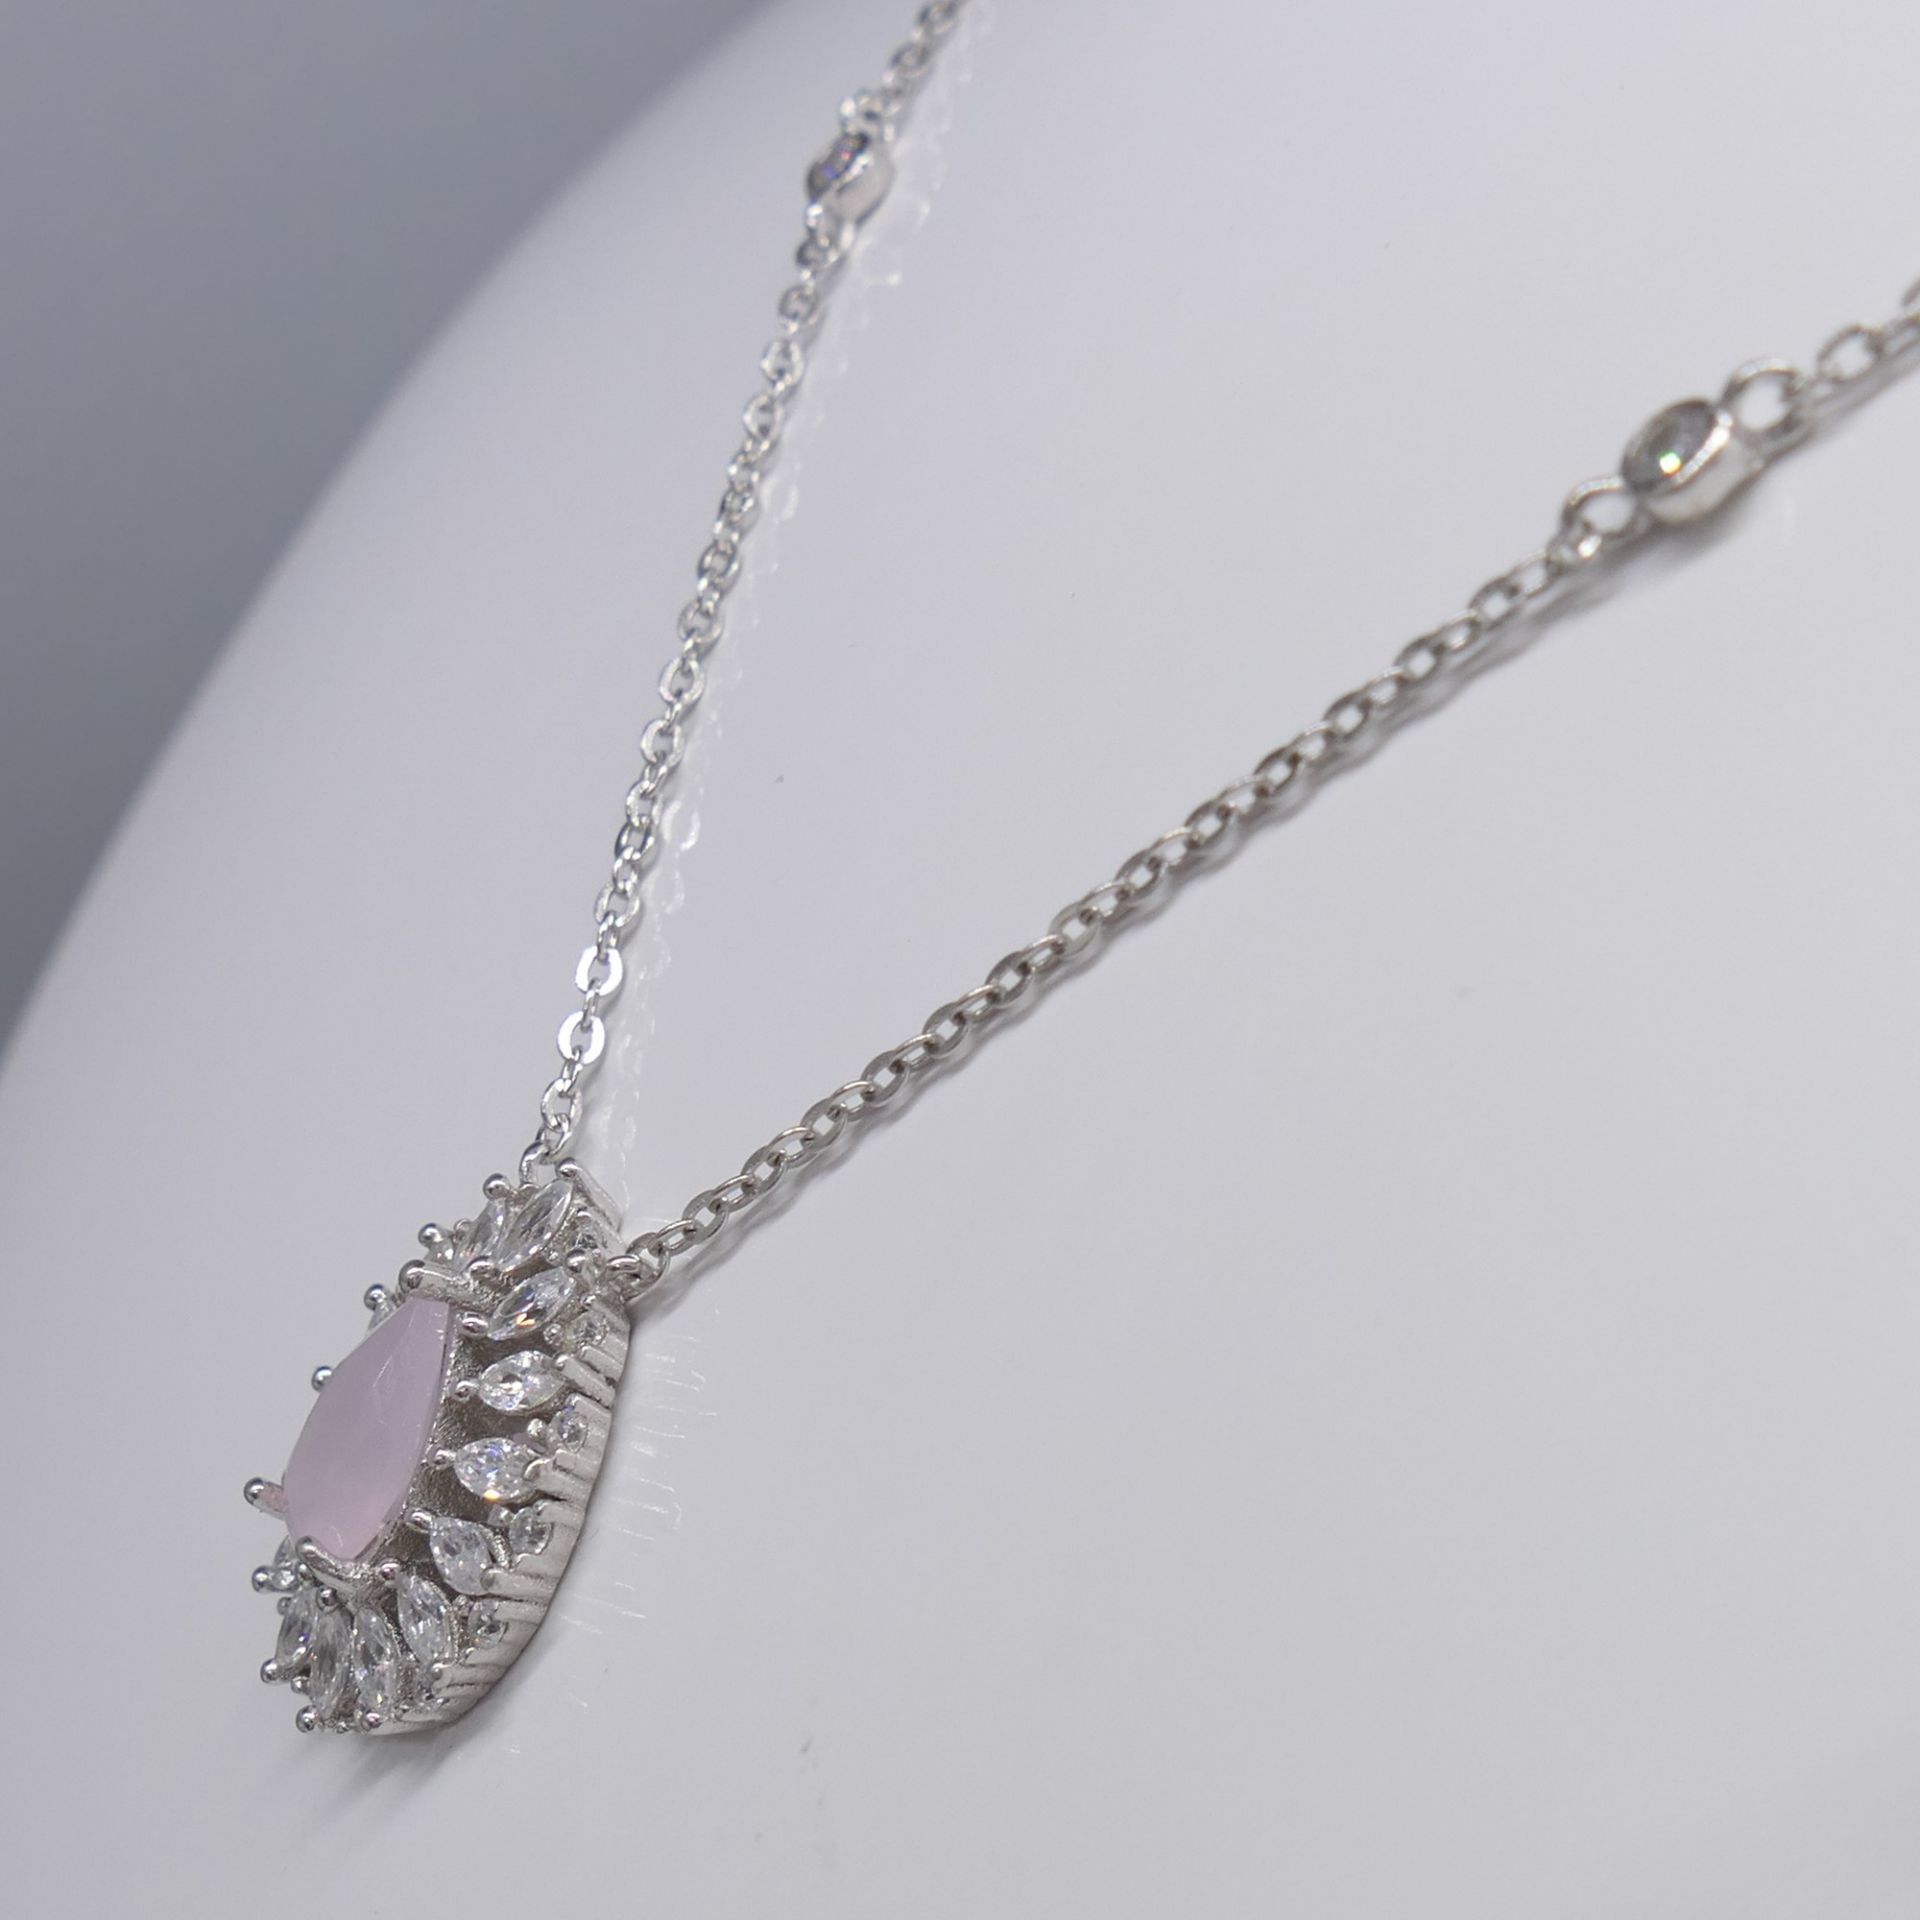 Silver Stylish Pink Rose-Coloured Gem and White Cubic Zirconia Necklace - Image 5 of 7